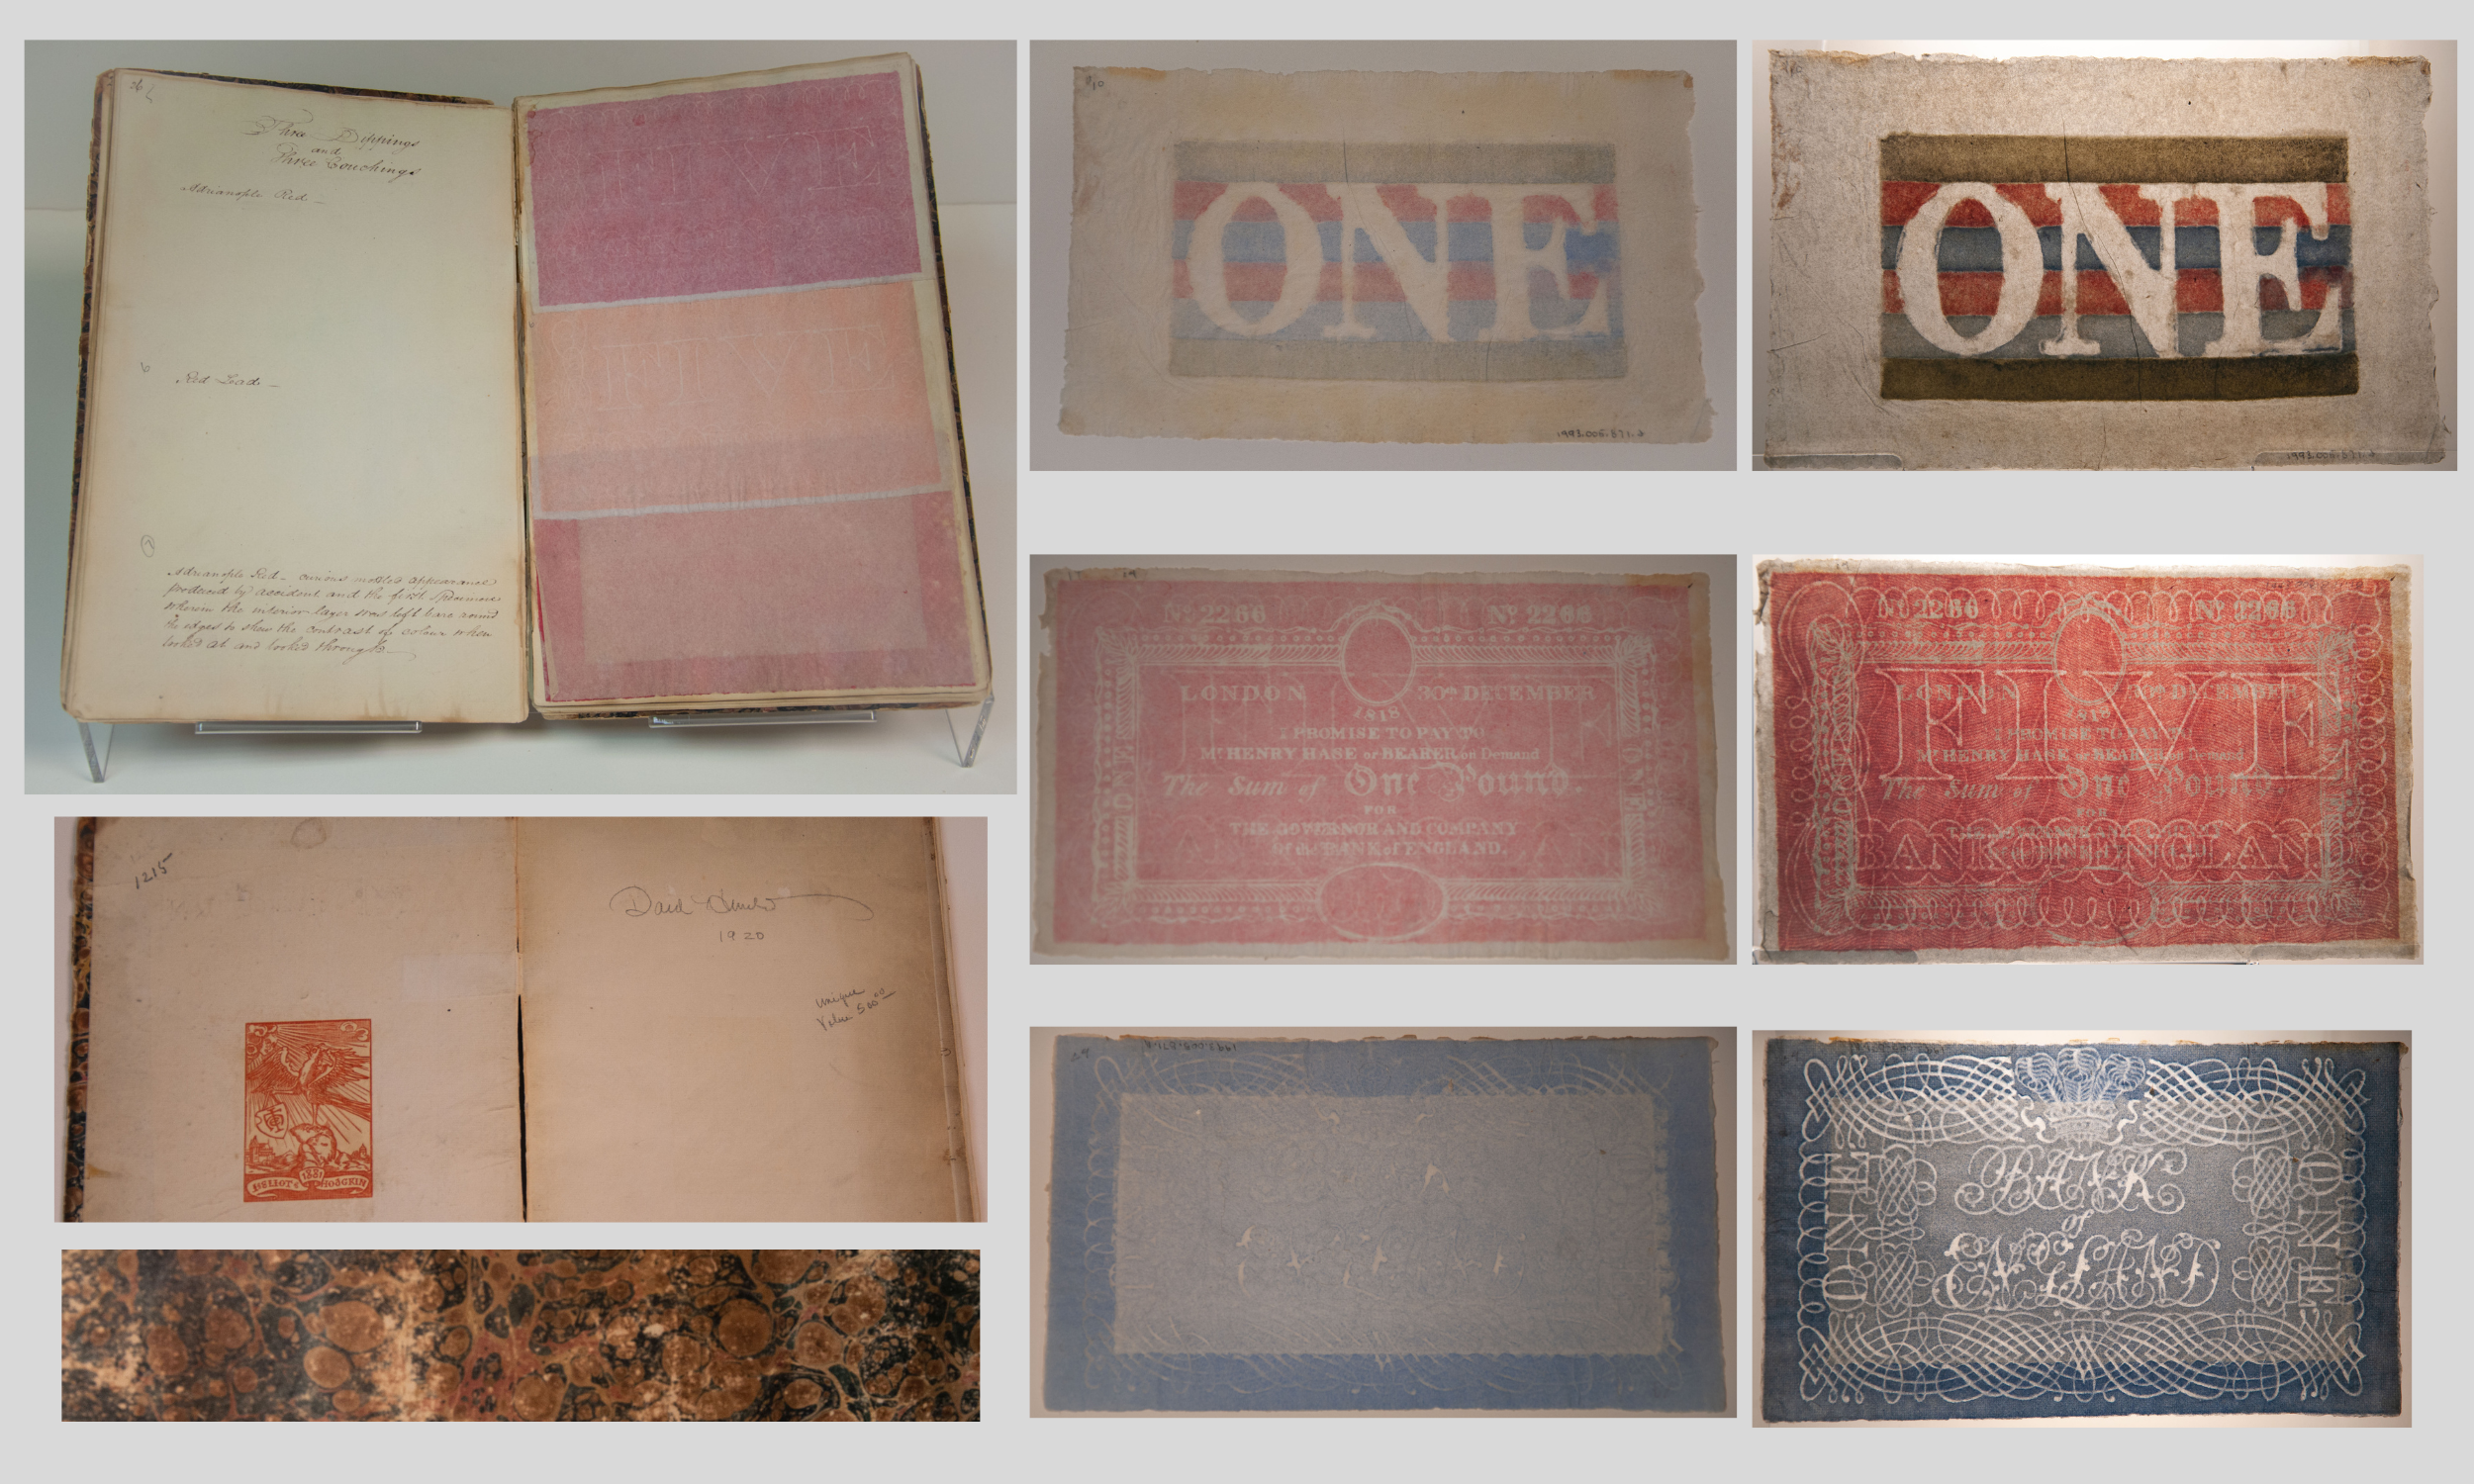 Photo collage of the Congreve workbook. Clockwise from the upper left corner: A spread of the workbook with cursive notations at the top and bottom of a mostly blank left page and three pasted watermark samples on papers that are shades of pink and peach. Natural tan paper with the word ONE in capital letters on a background of horizontal green, red, blue, red, blue, green stripes. Below these are red one pound and red five pound notes followed by blue one pound notes. All with calligraphic decorative curly patterns created by watermarks. And the final two photos show the interior signature showing that the book belonged to Dard Hunter 1920, Unique Value $500.00 and the marbled cover.